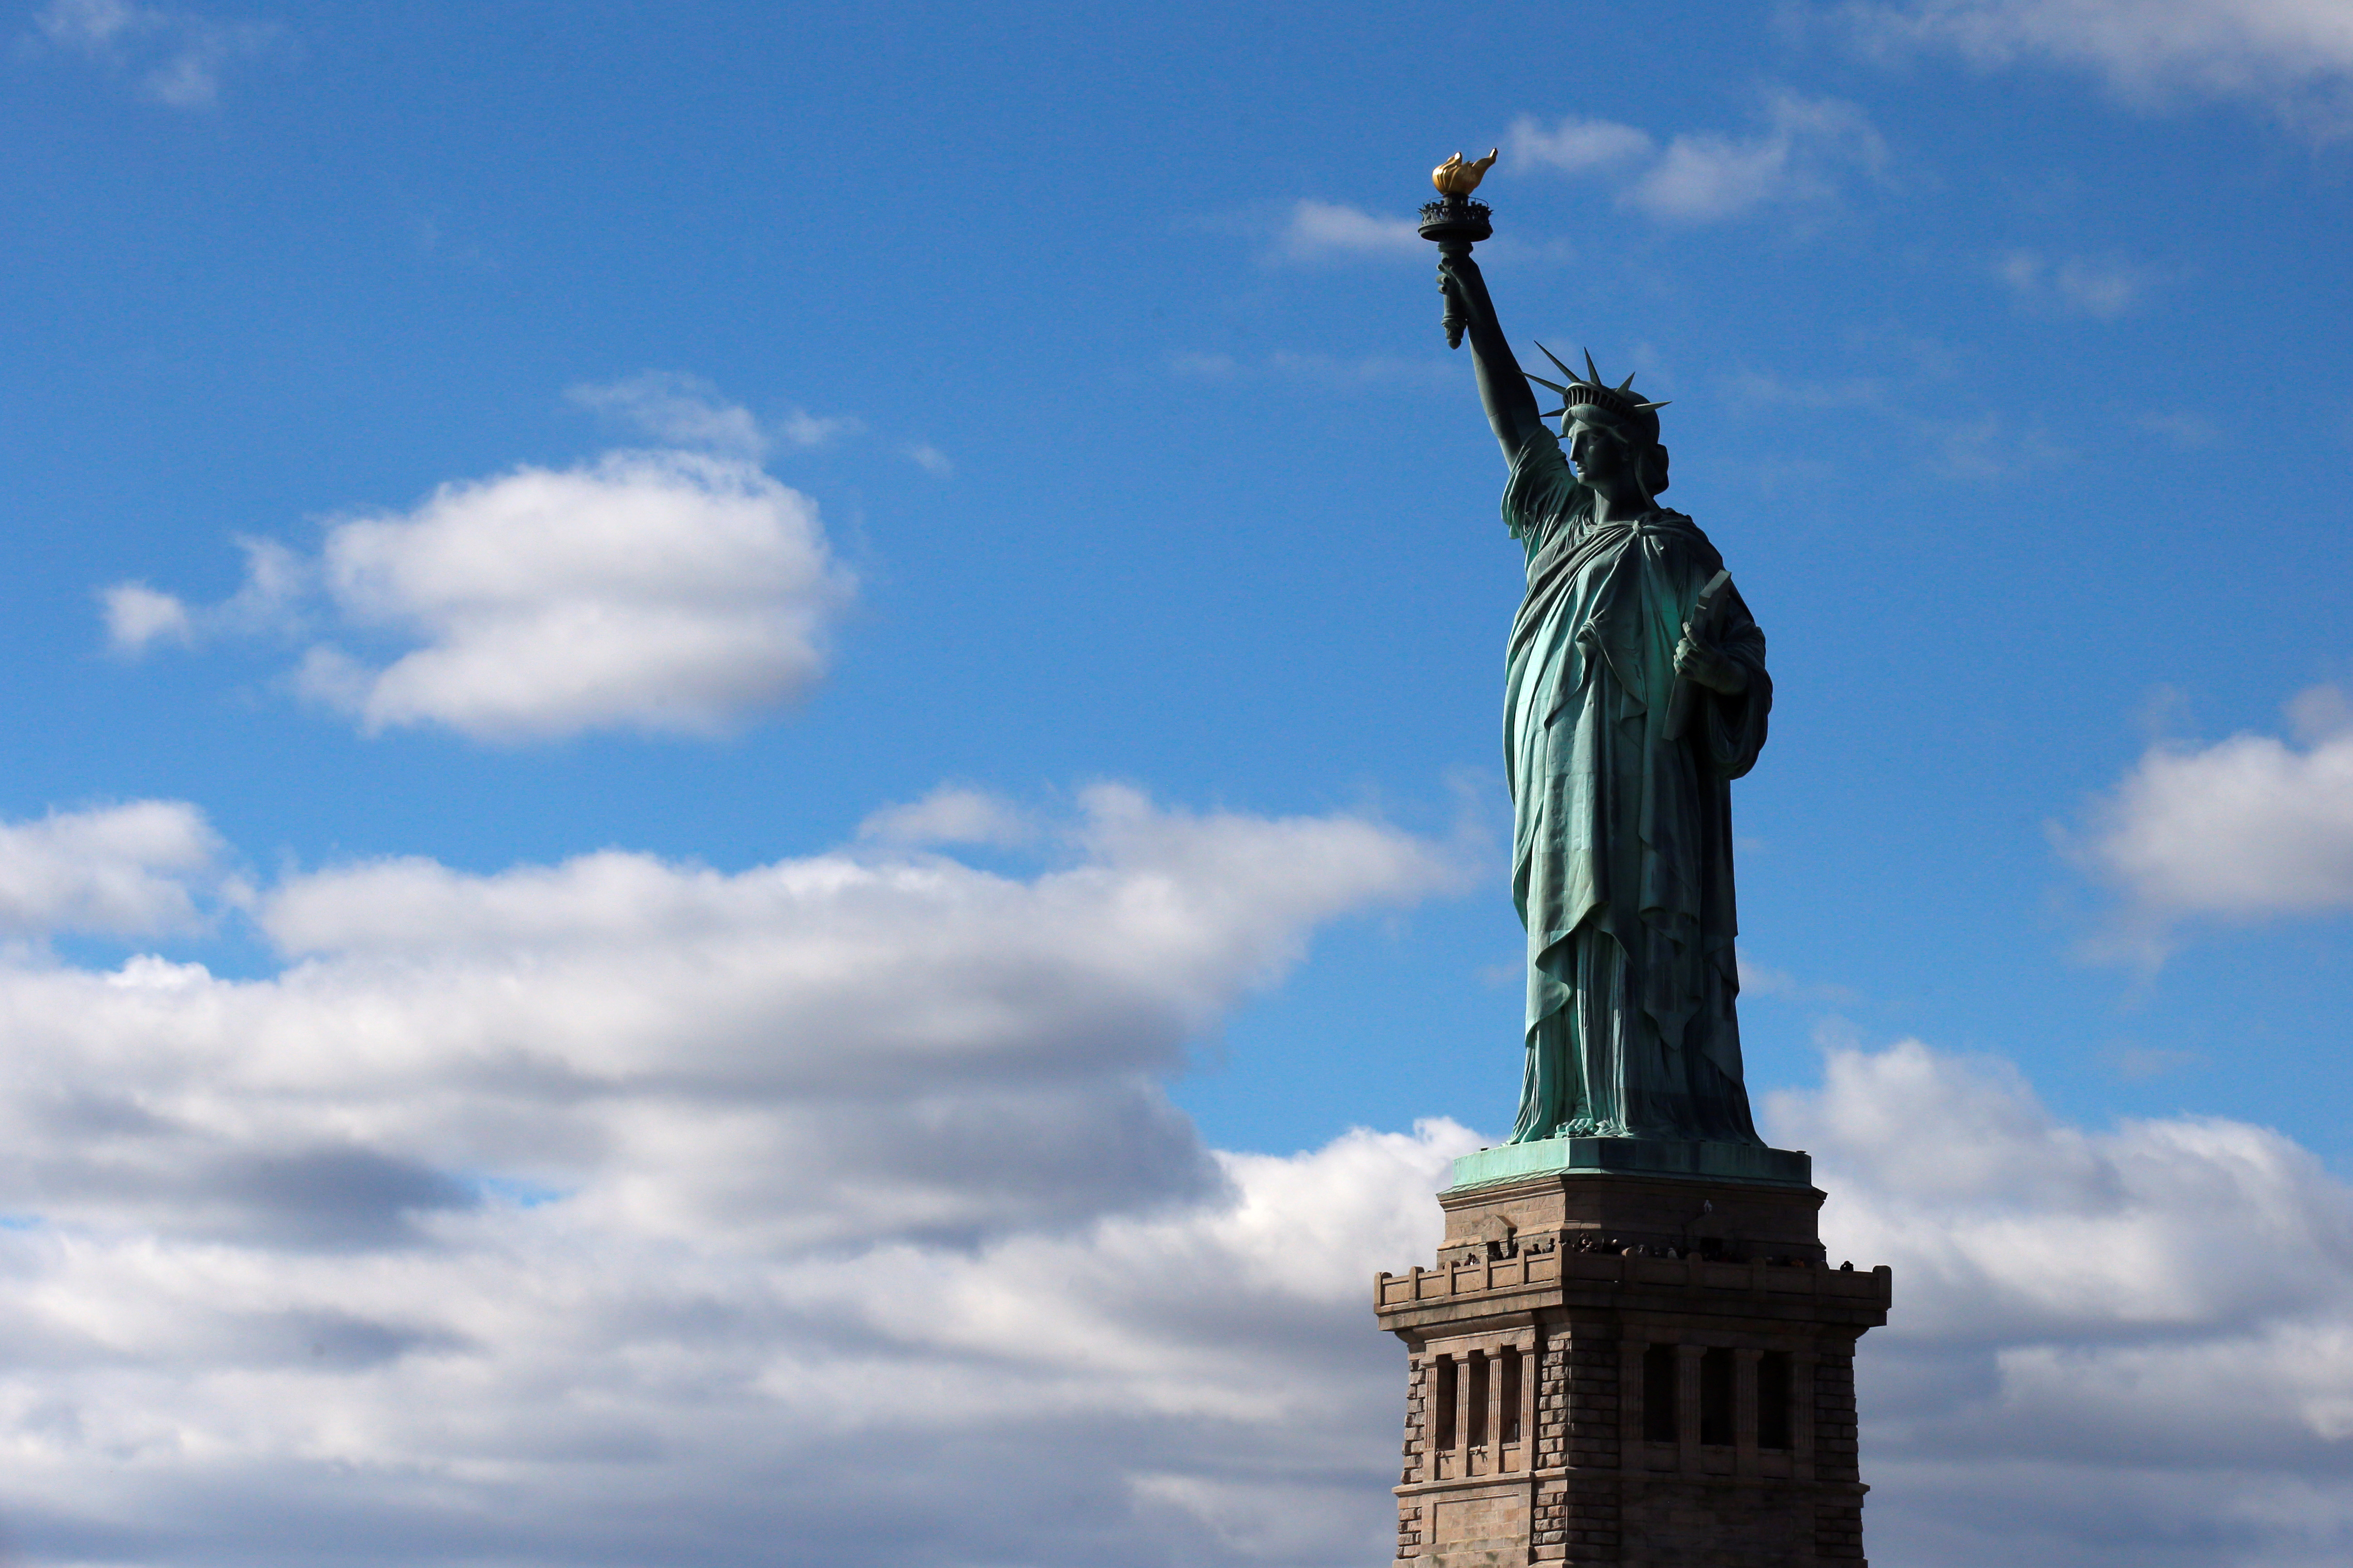 The Statue of Liberty is seen on the 130th anniversary of the dedication in New York Harbor